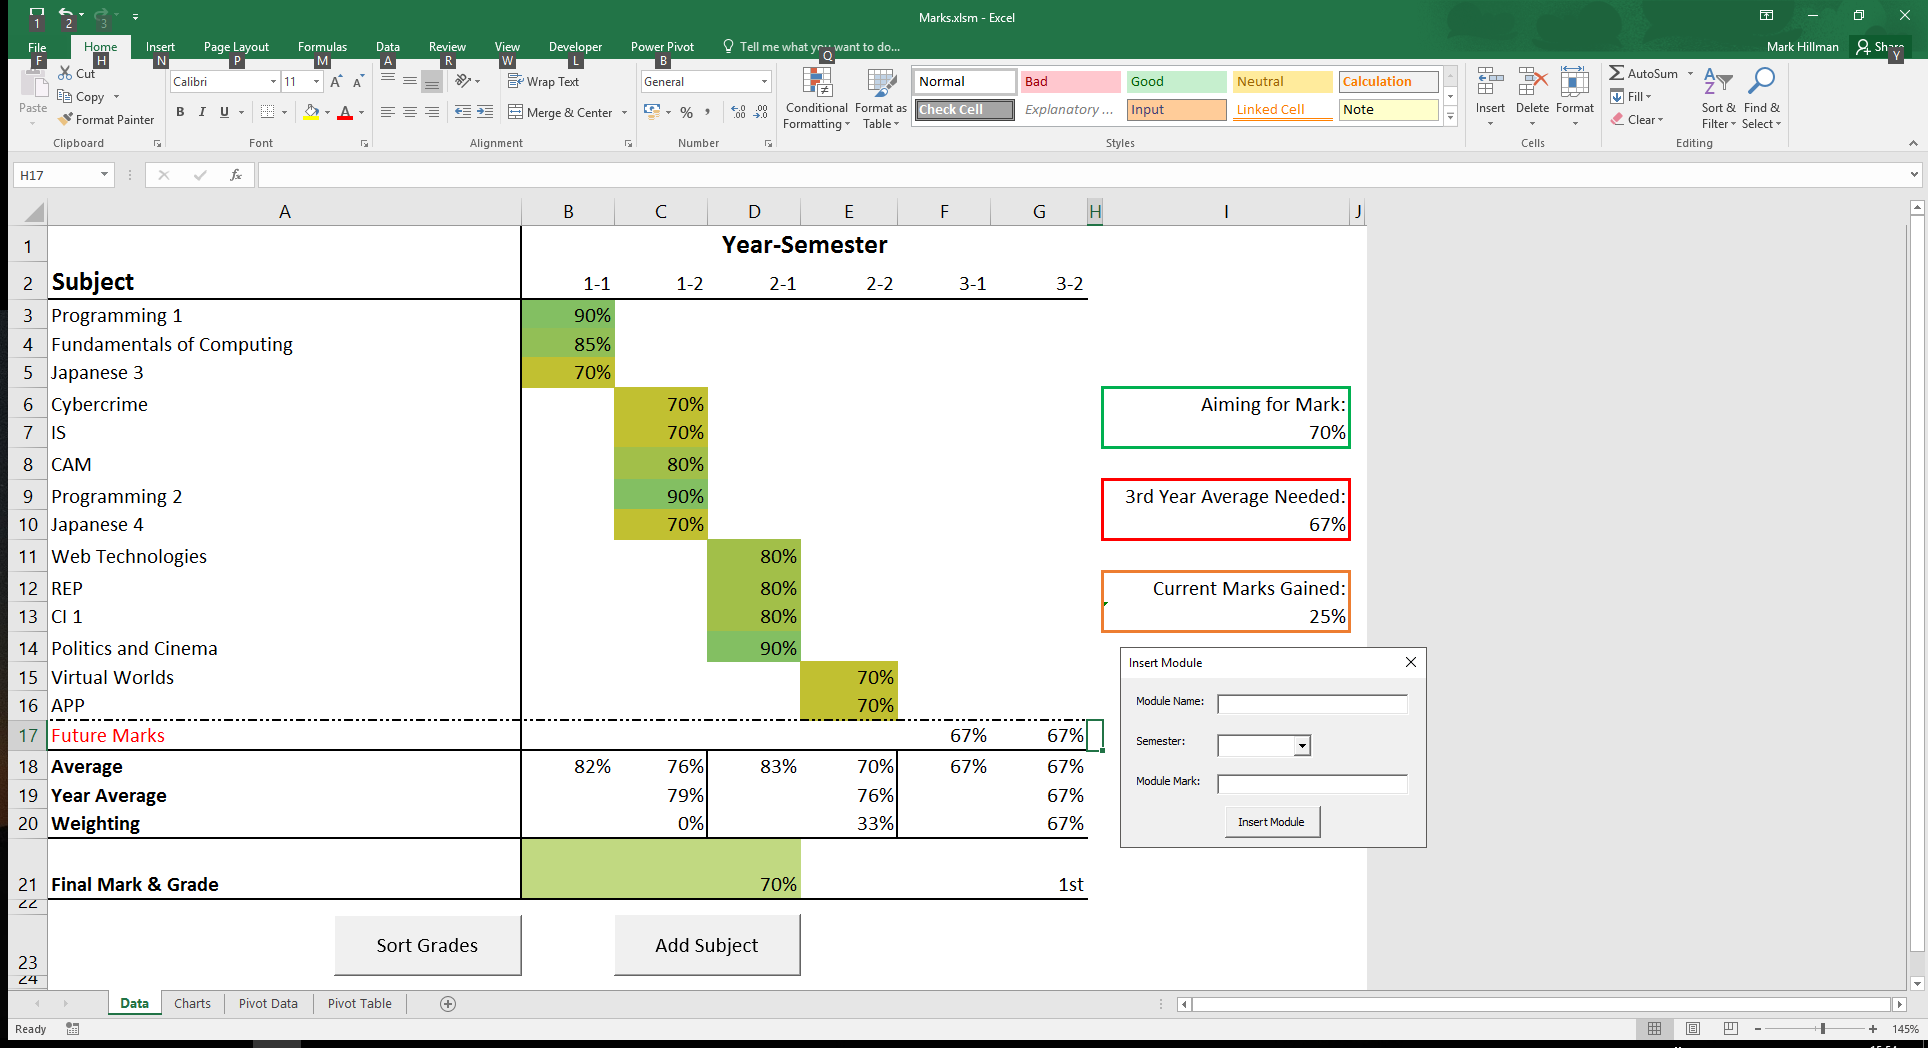 A screenshot of the main spreadsheet page